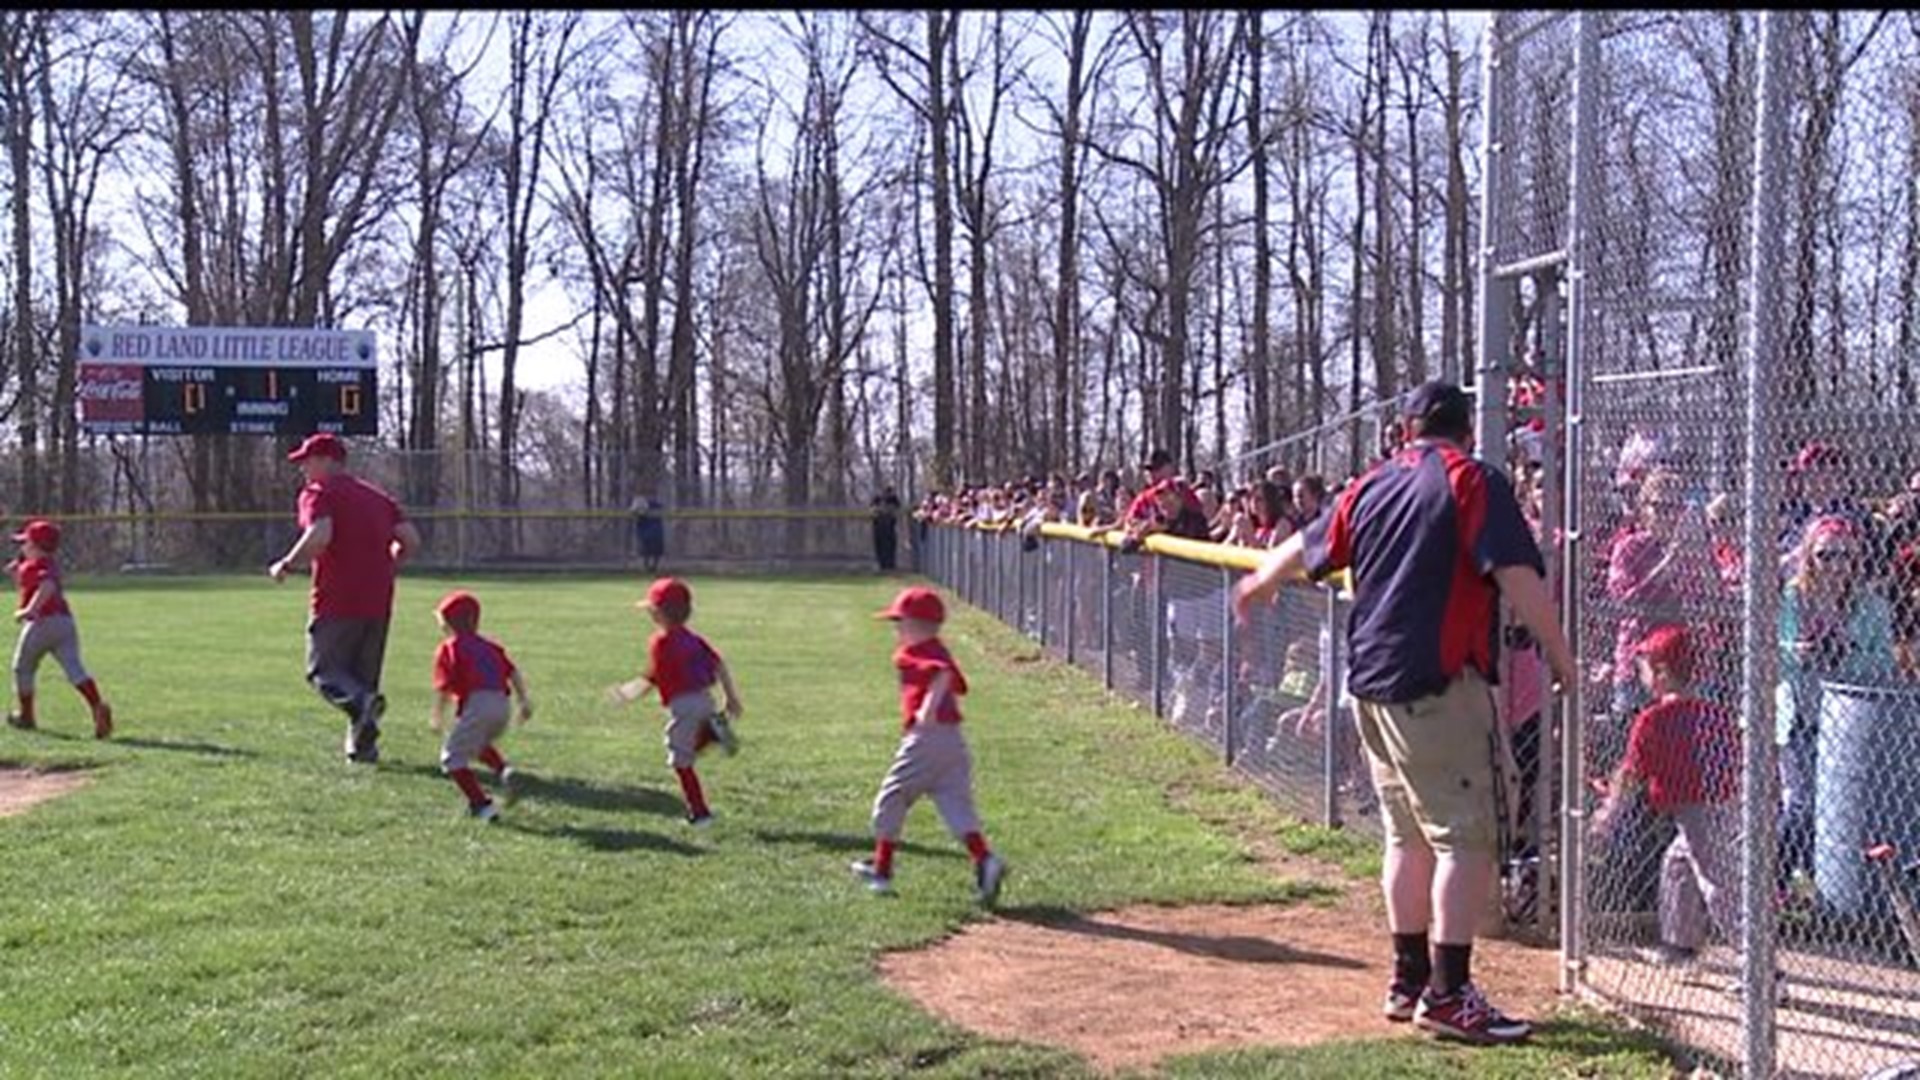 Opening Day for Red Land Little League